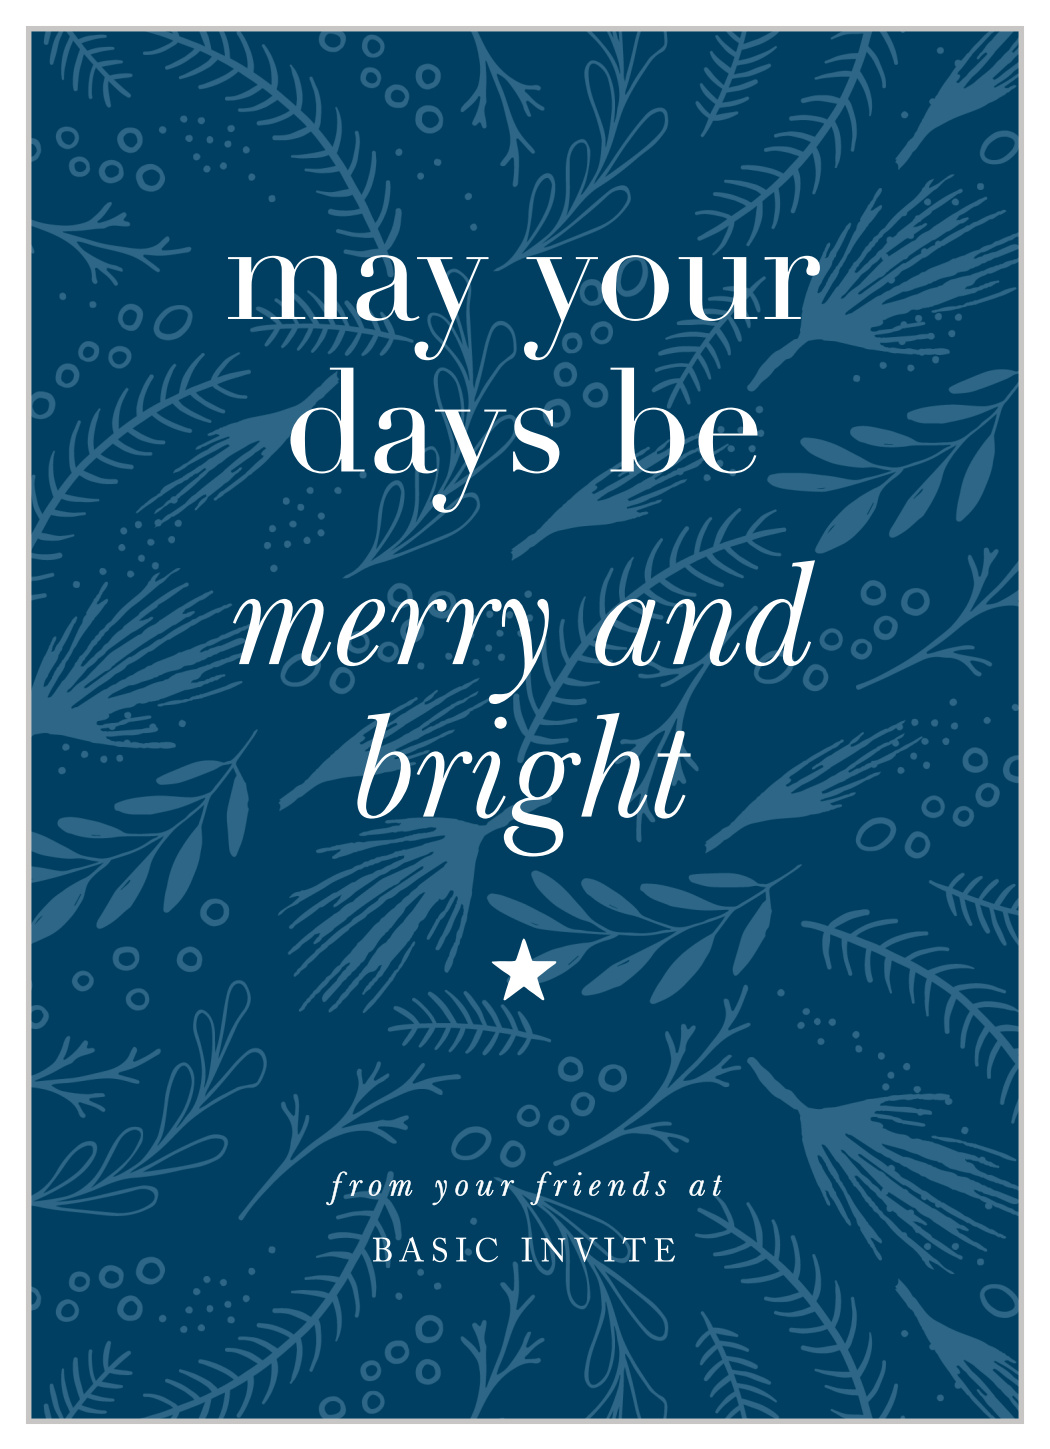 Best Wishes Corporate Holiday Cards